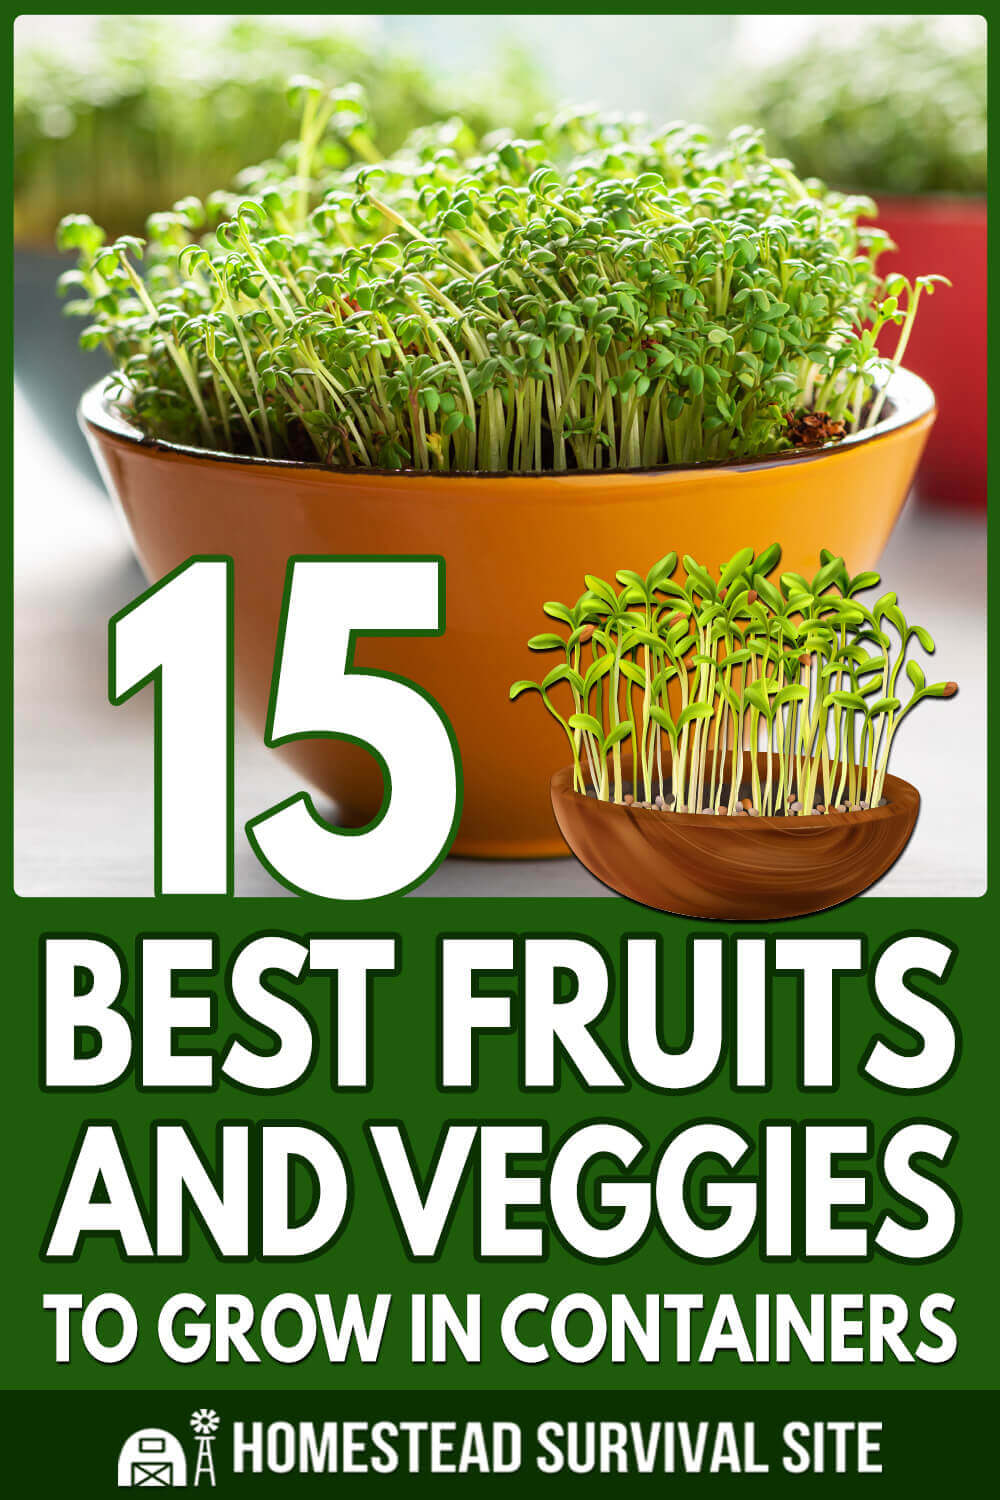 15 Best Fruits and Veggies to Grow in Containers